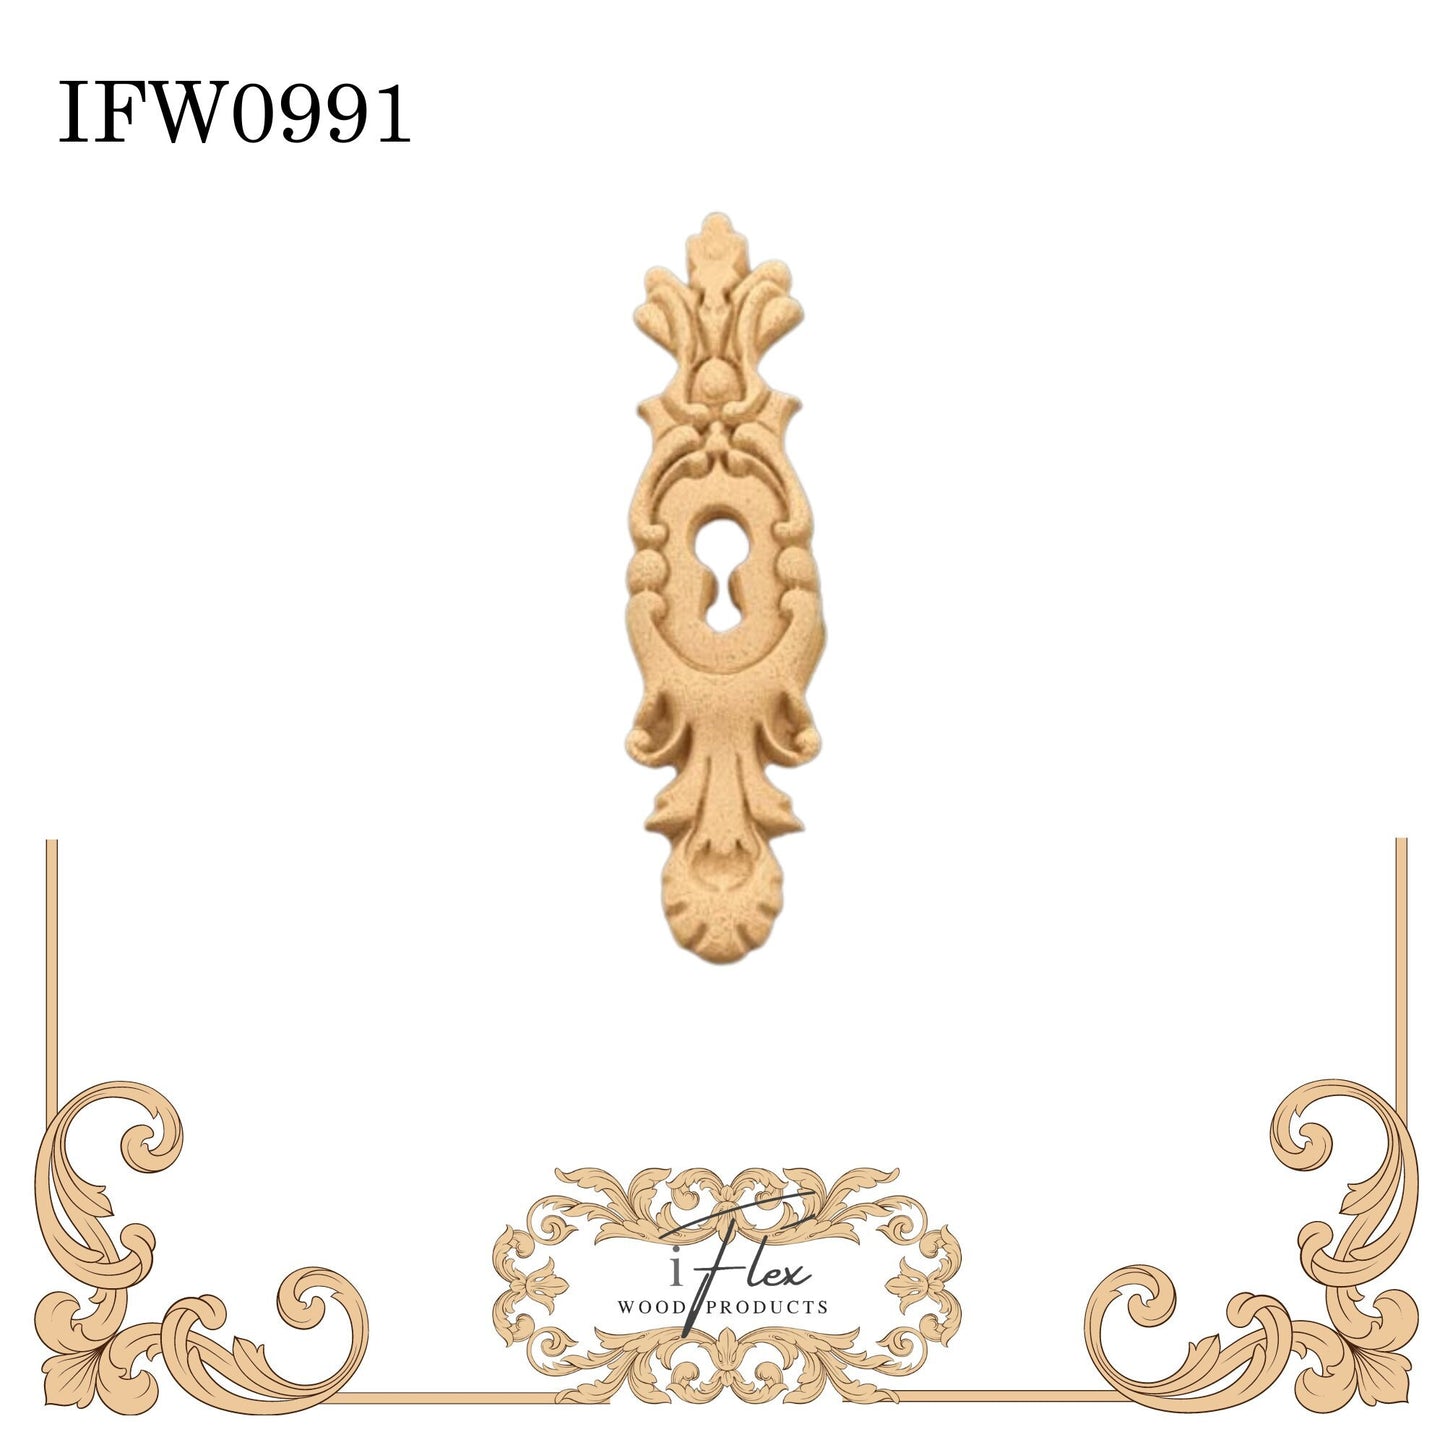 IFW 0991 iFlex Wood Products, bendable mouldings, flexible, wooden appliques, drop